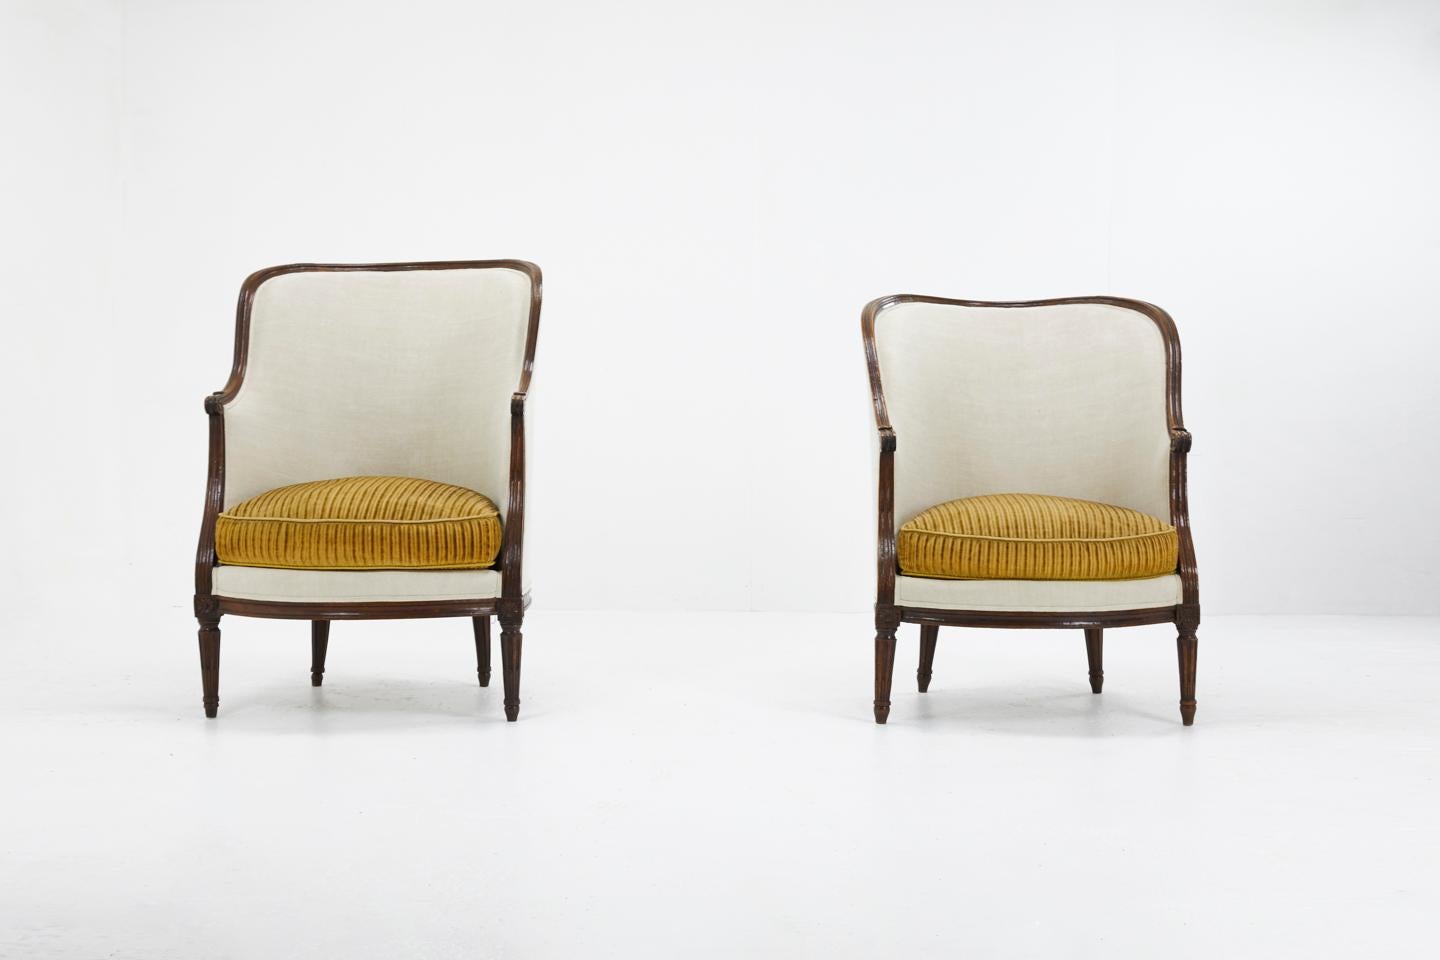 Pair of French 18th century walnut armchairs of nice simple style, upholstered in vintage linen and cushions covered in a vintage cotton corduroy. 

Made as ladies' and gentleman's so slightly different in size.

Measures: Seat height 48